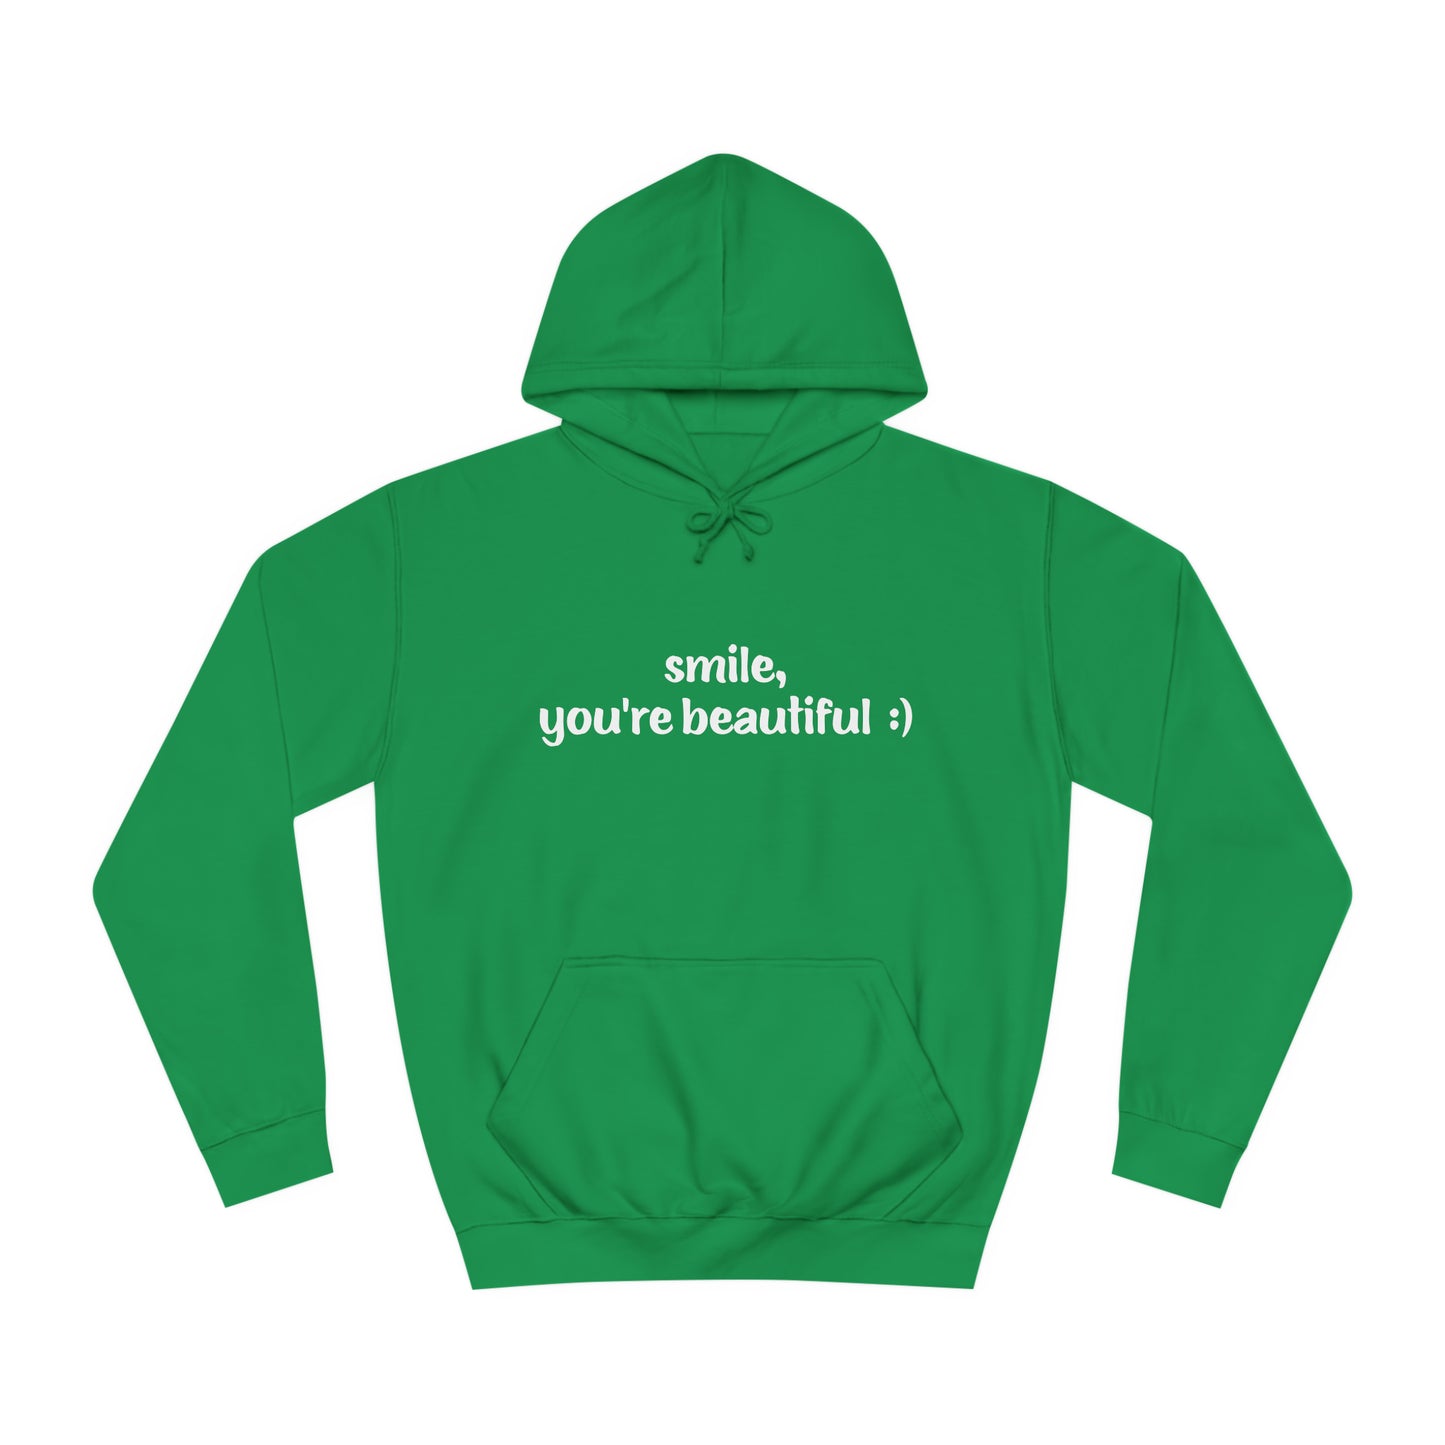 smile, you're beautiful :) | unisex casual hoodie